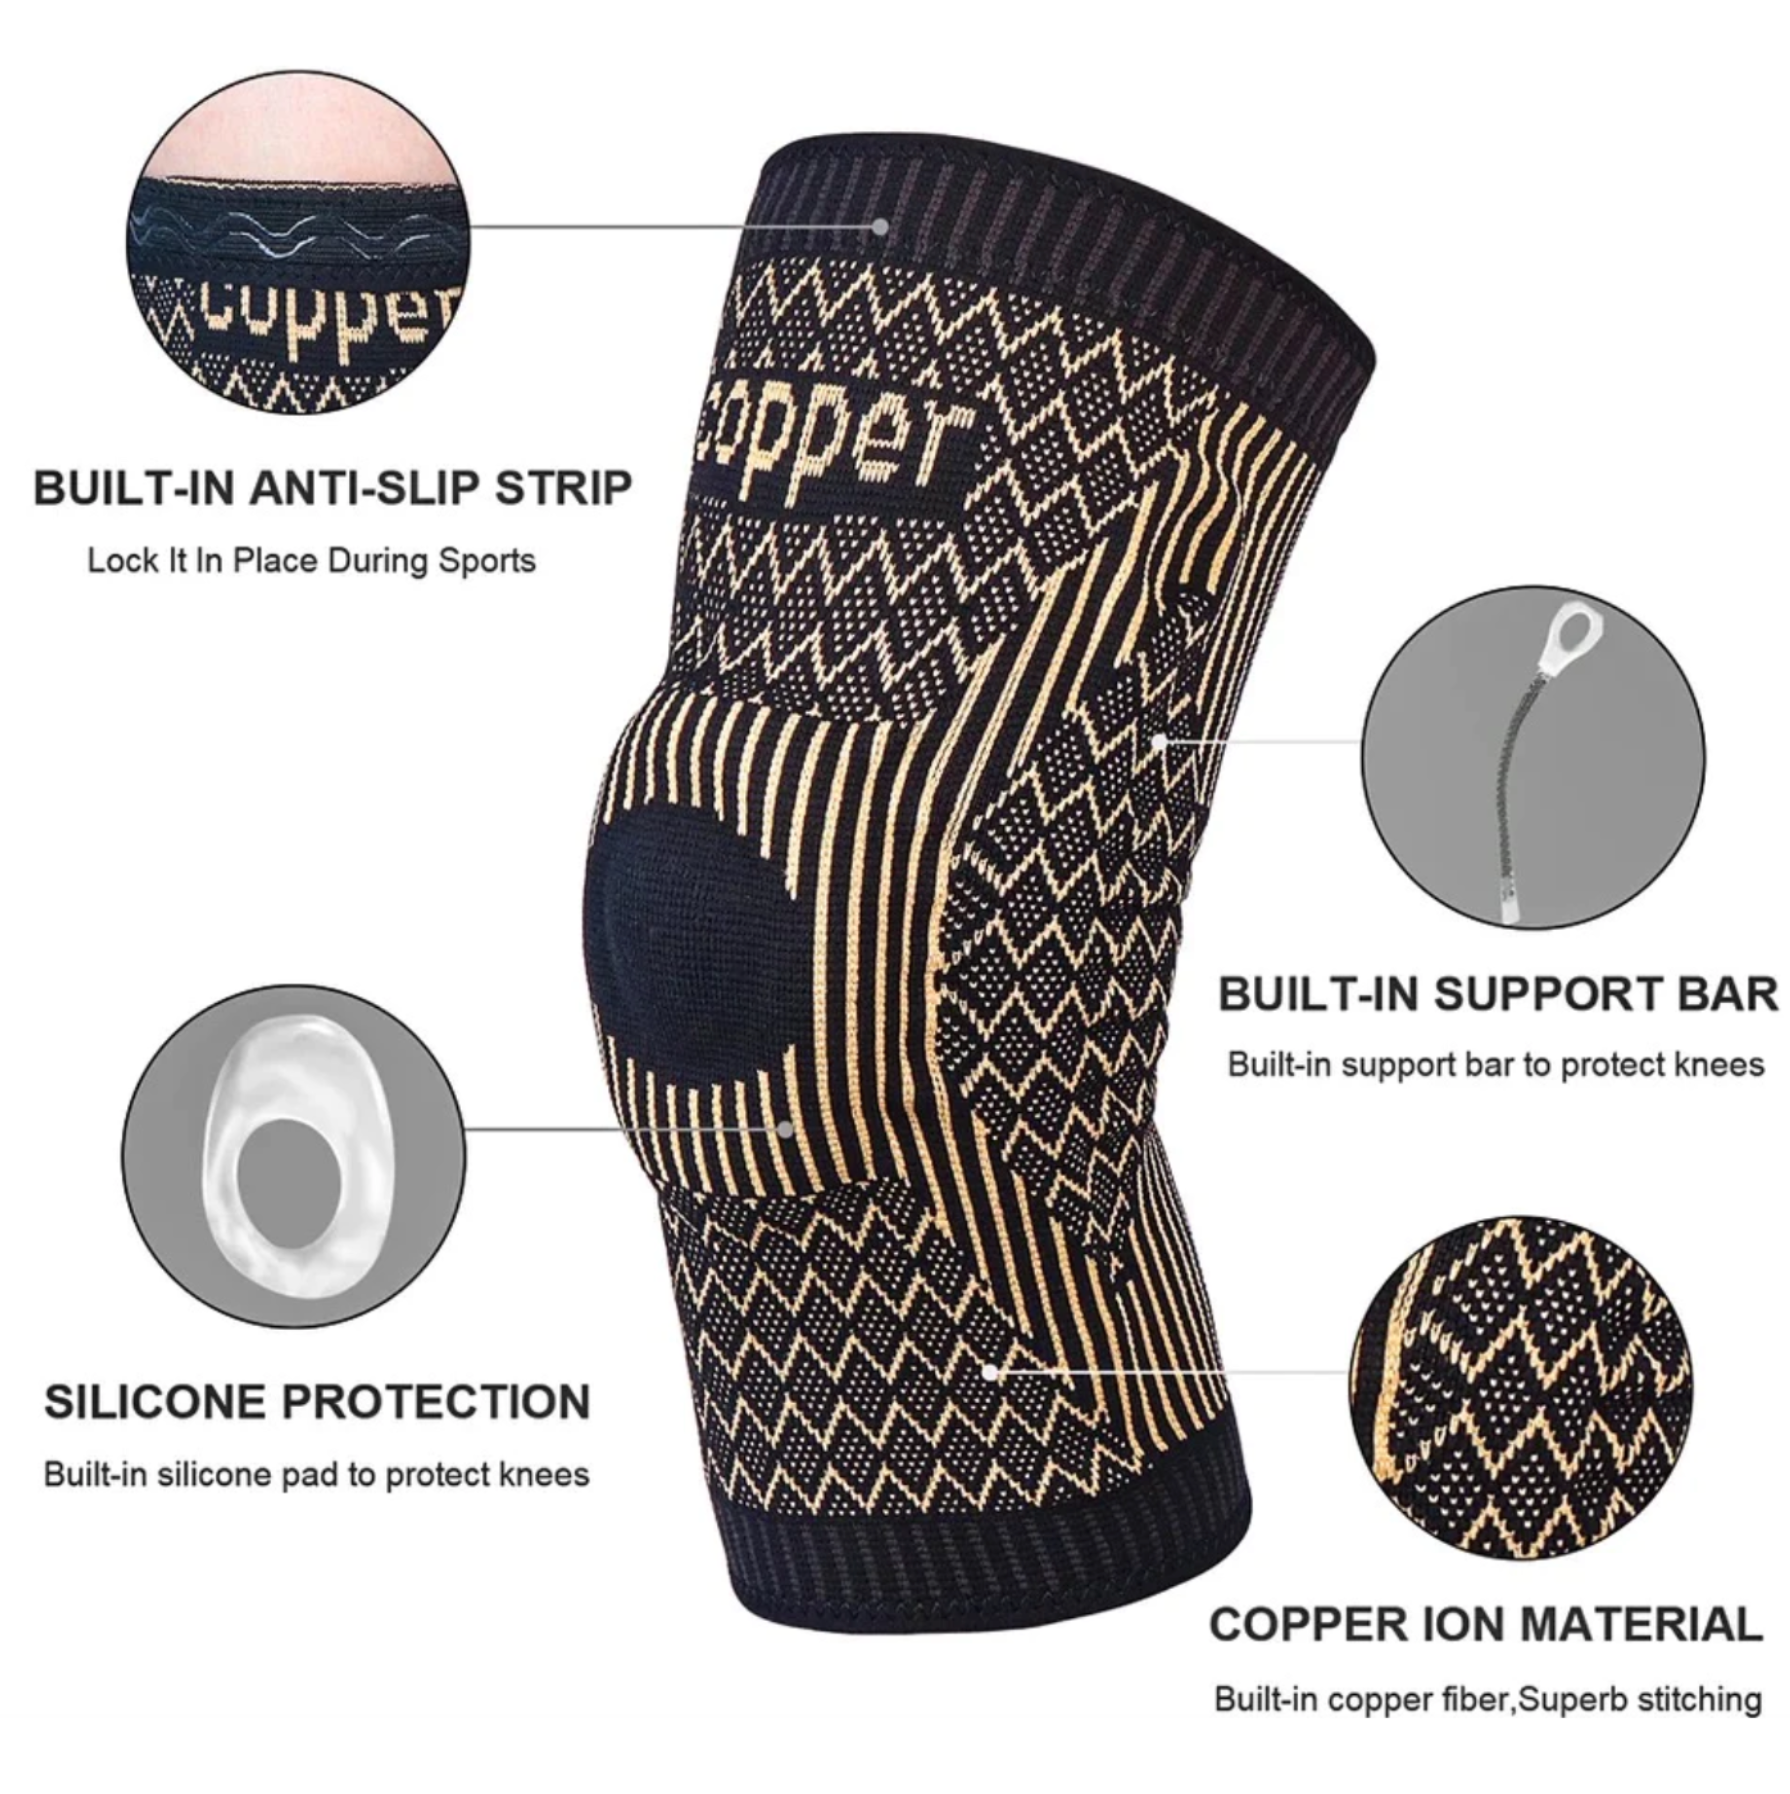 Copper Fit Knee Supports, Knee Style: Open, Style: Slip-On, Size